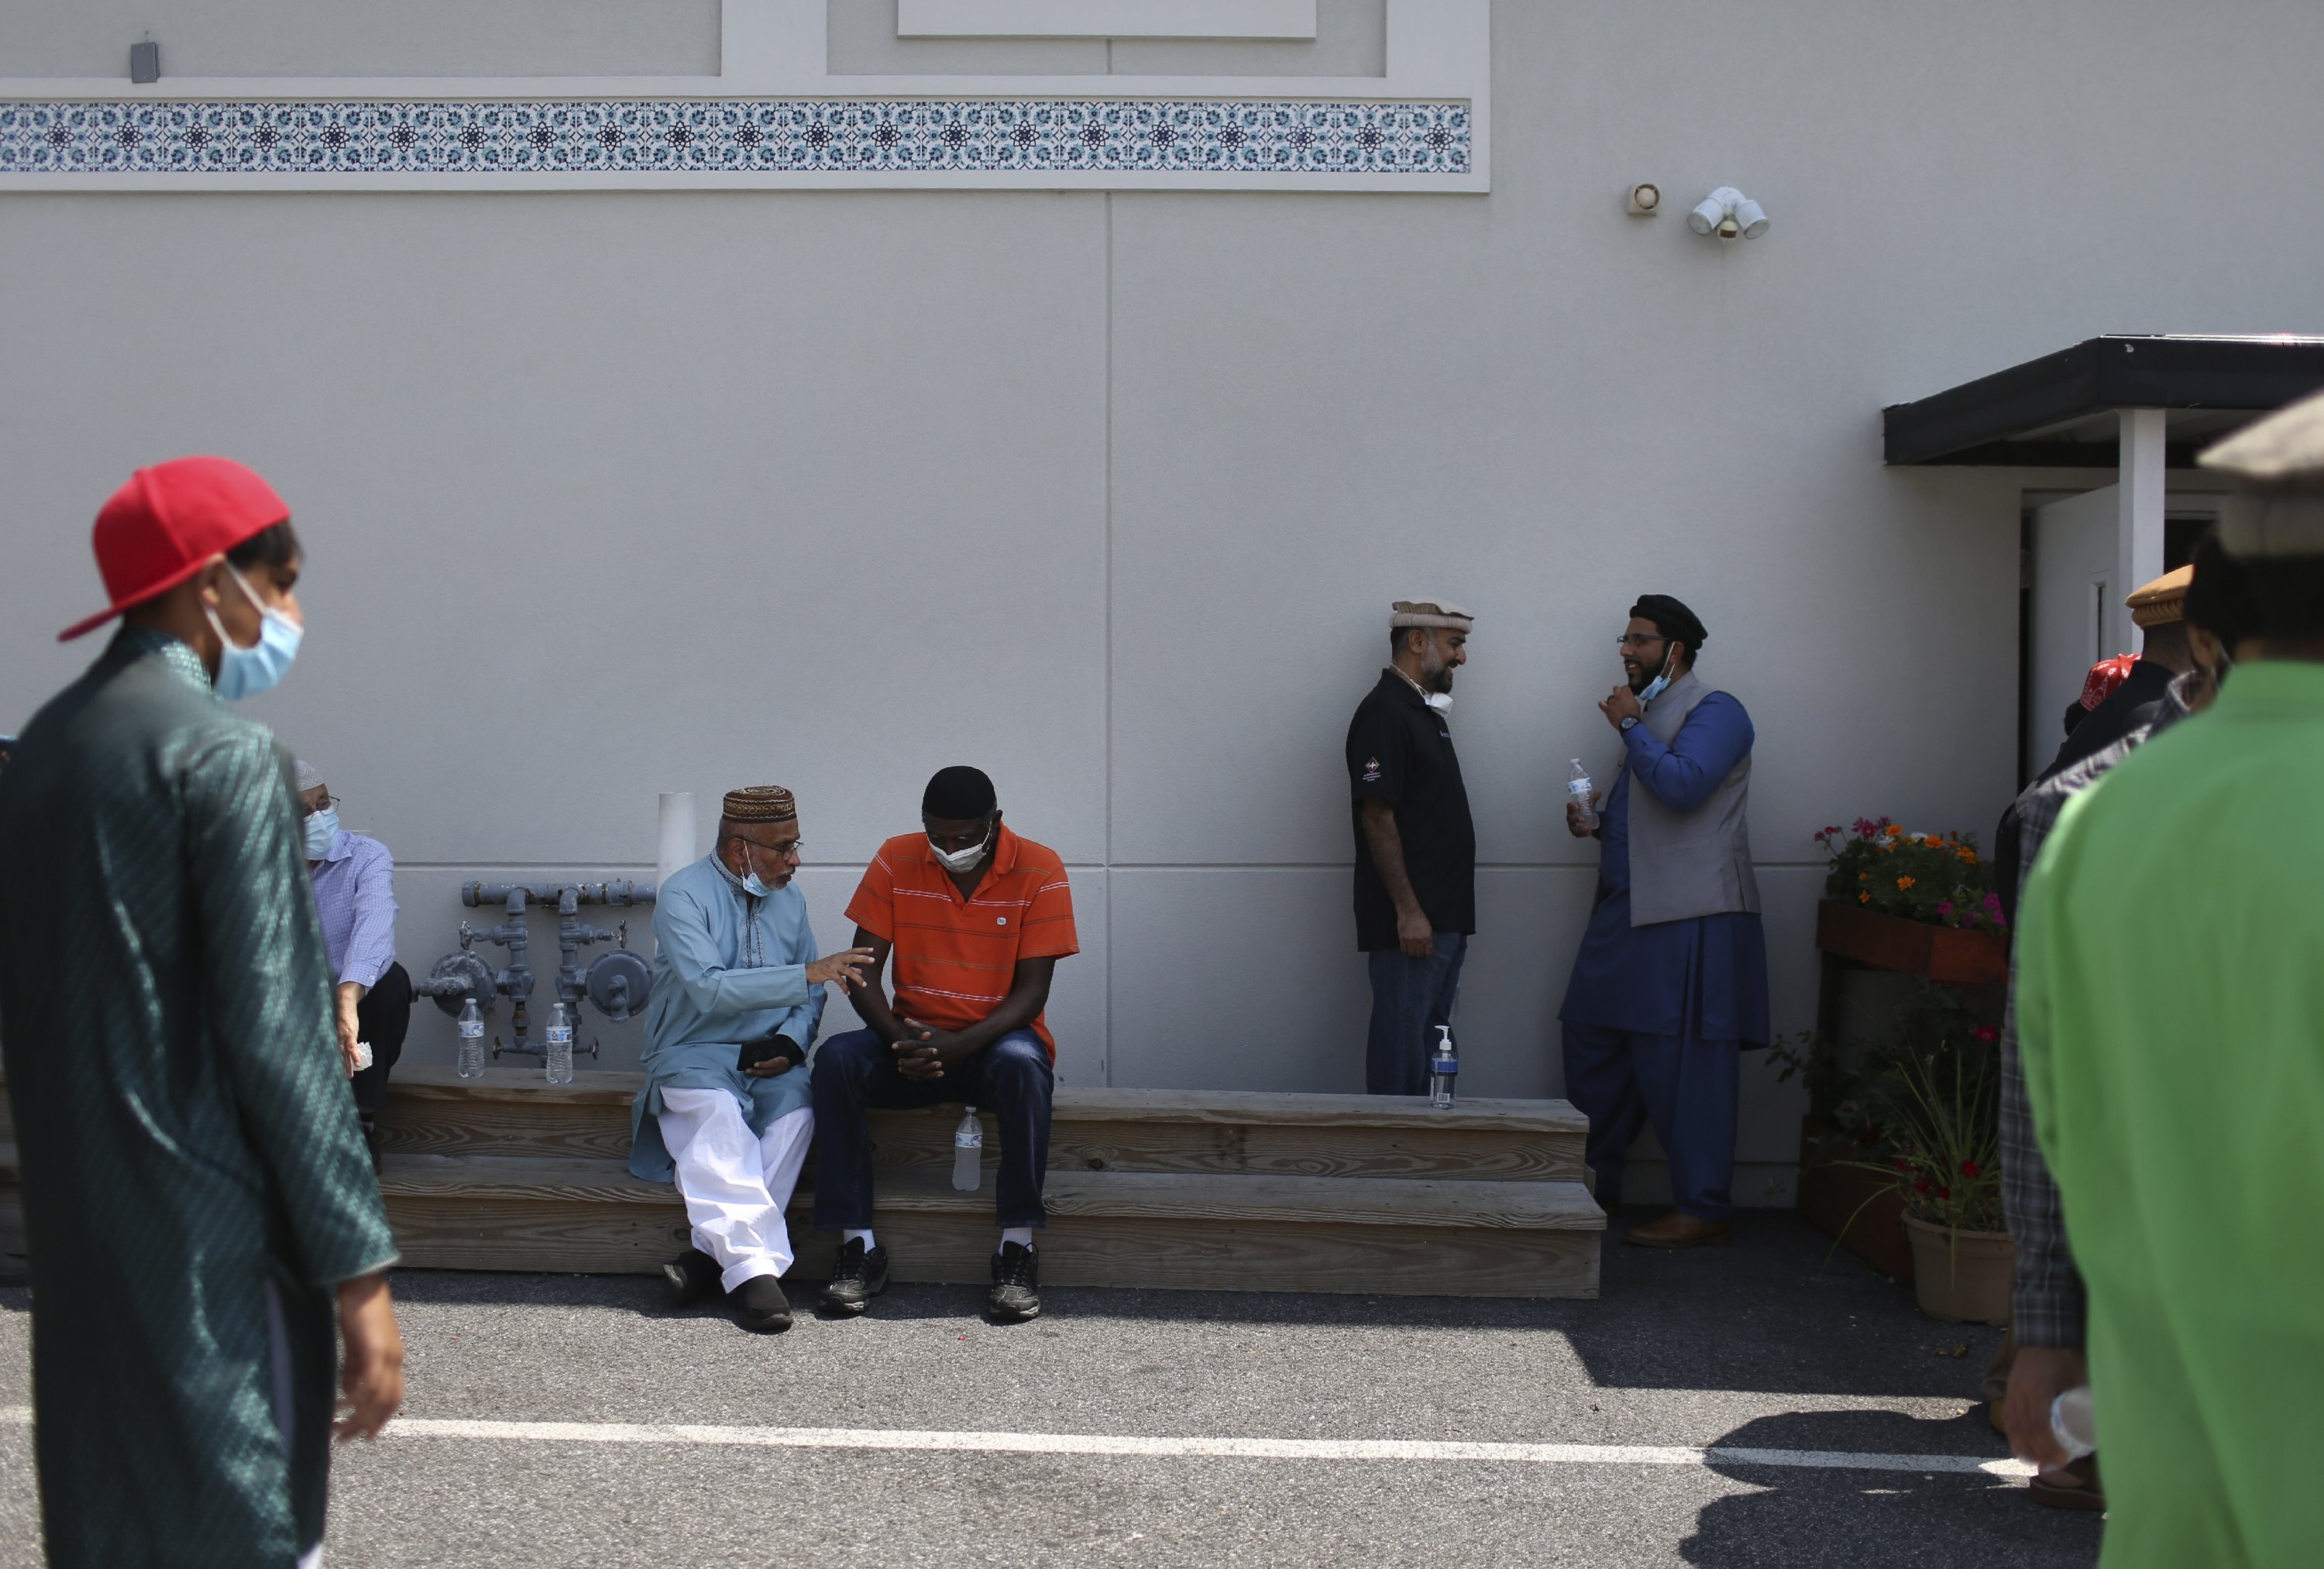 Community members talk outside of their local mosque after Friday prayer, Rosedale, Maryland, U.S., Aug. 13, 2021. (AP Photo)